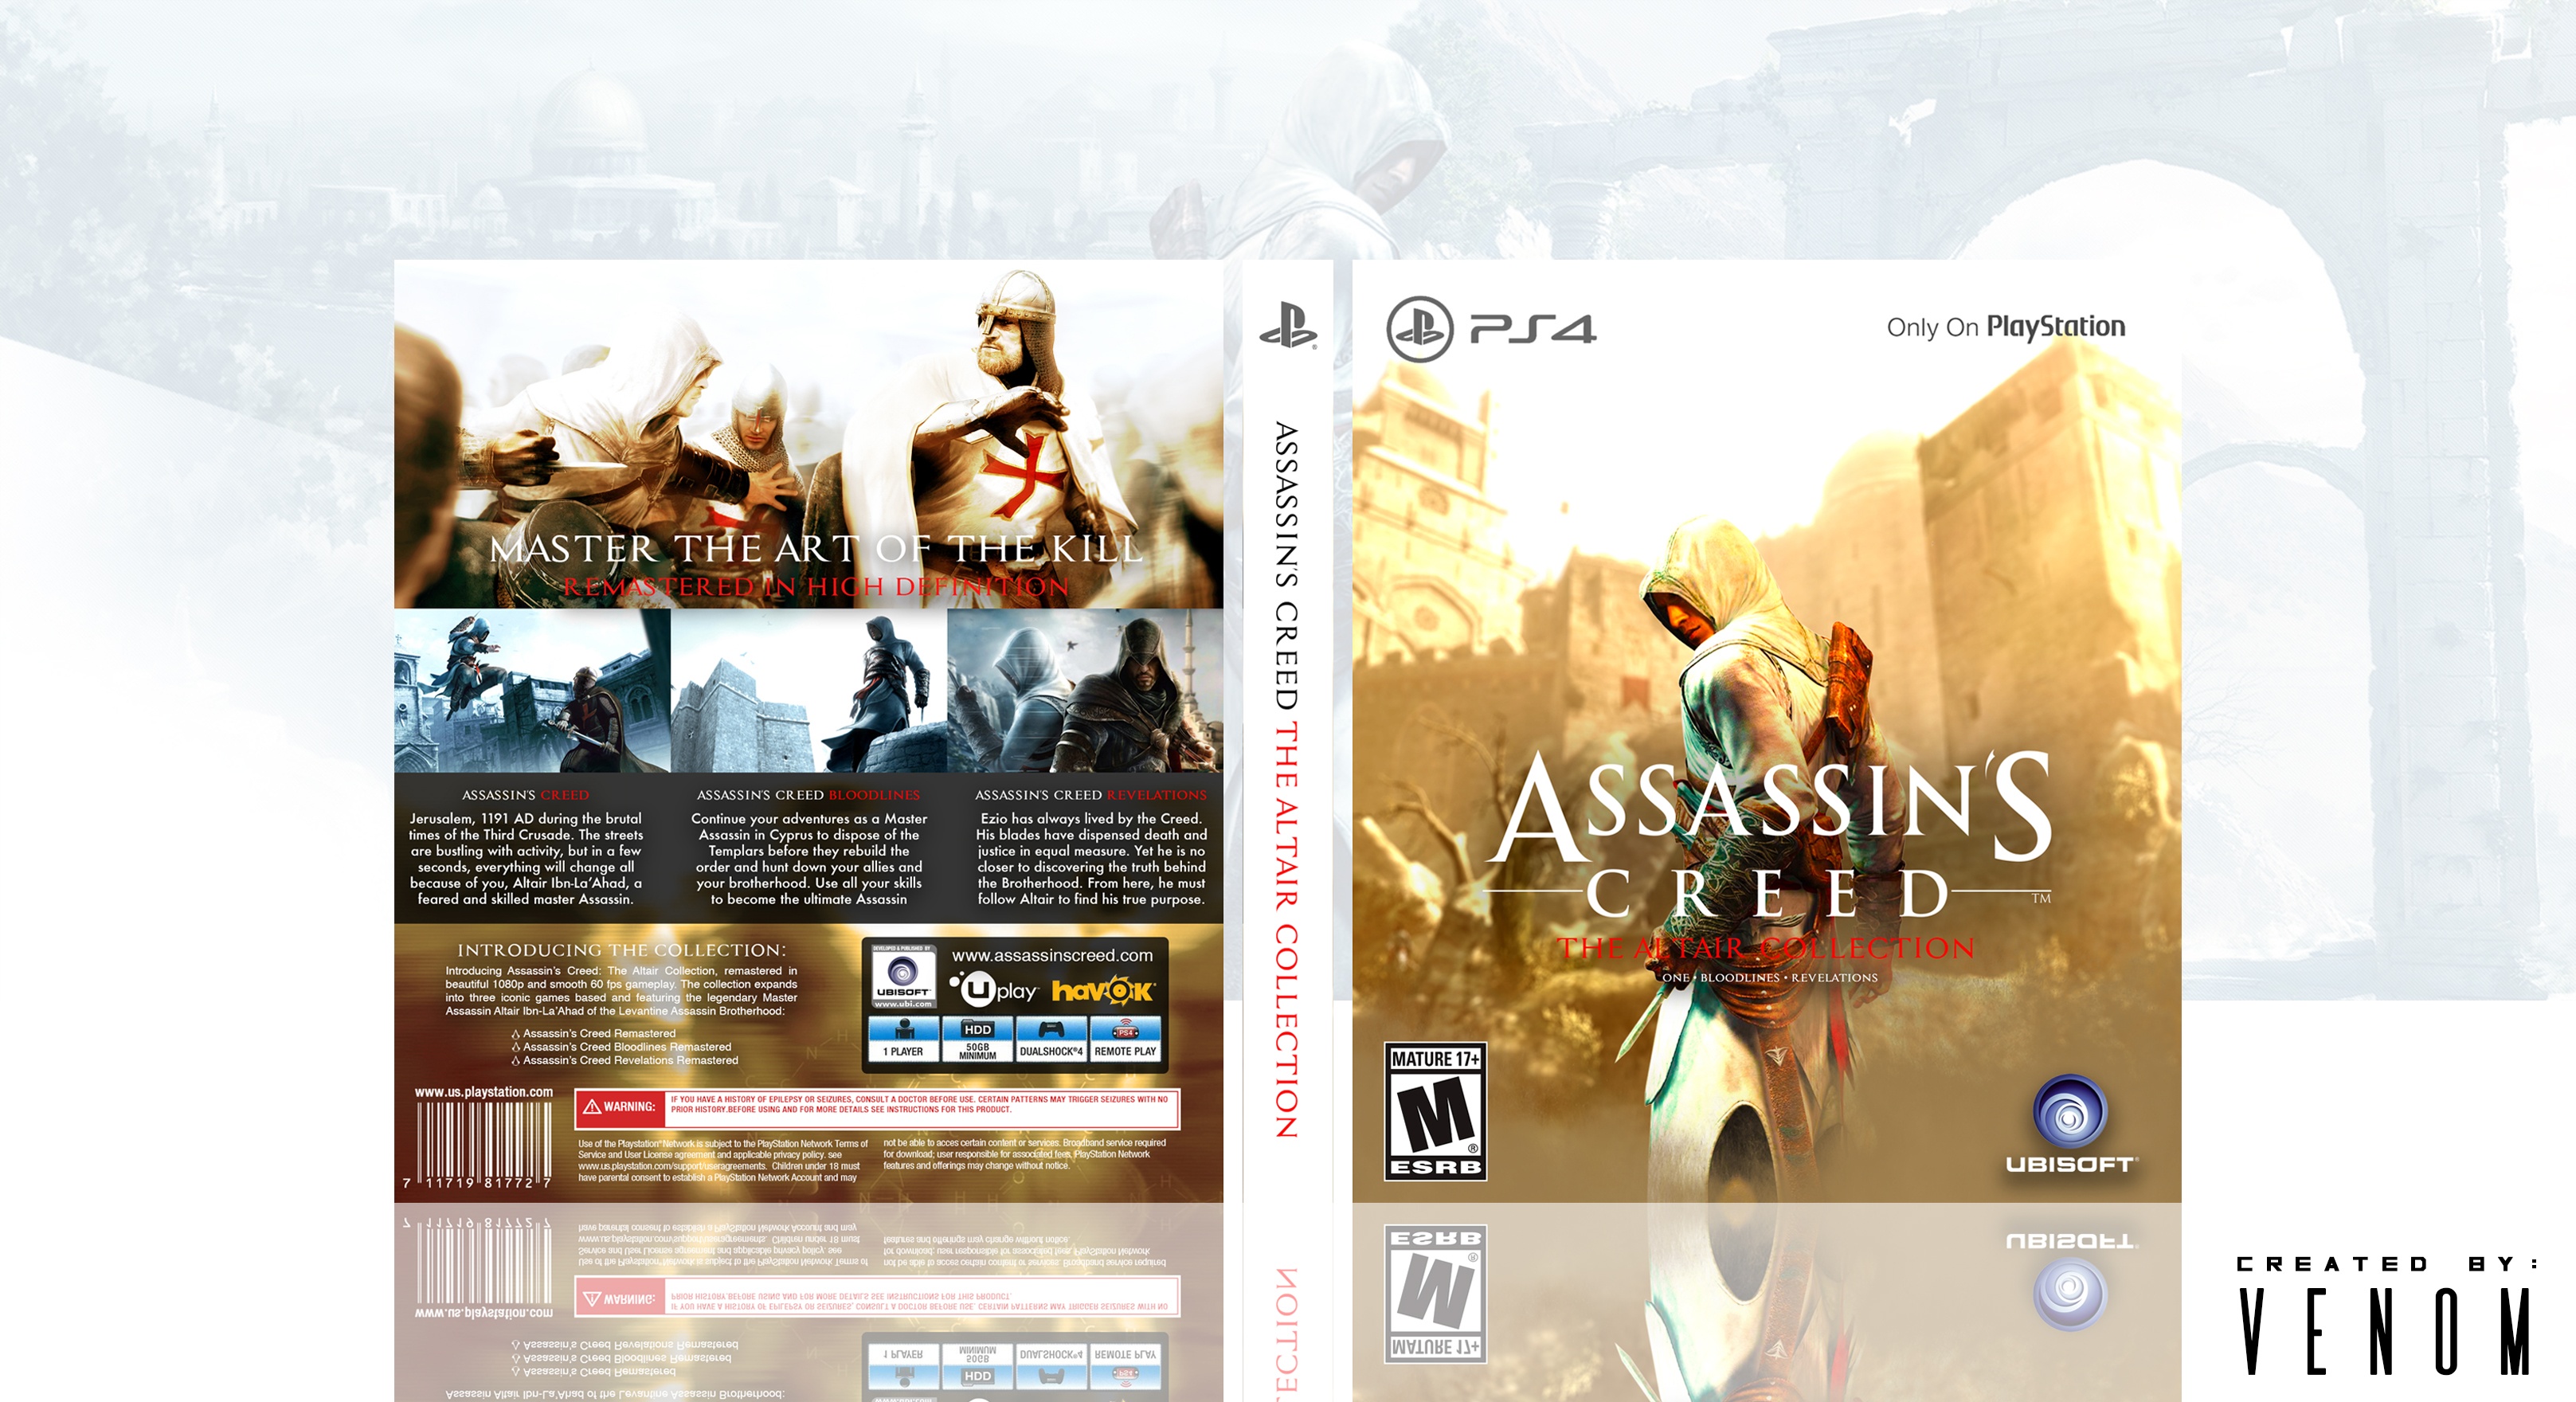 Assassin's Creed: The Altair Collection box cover